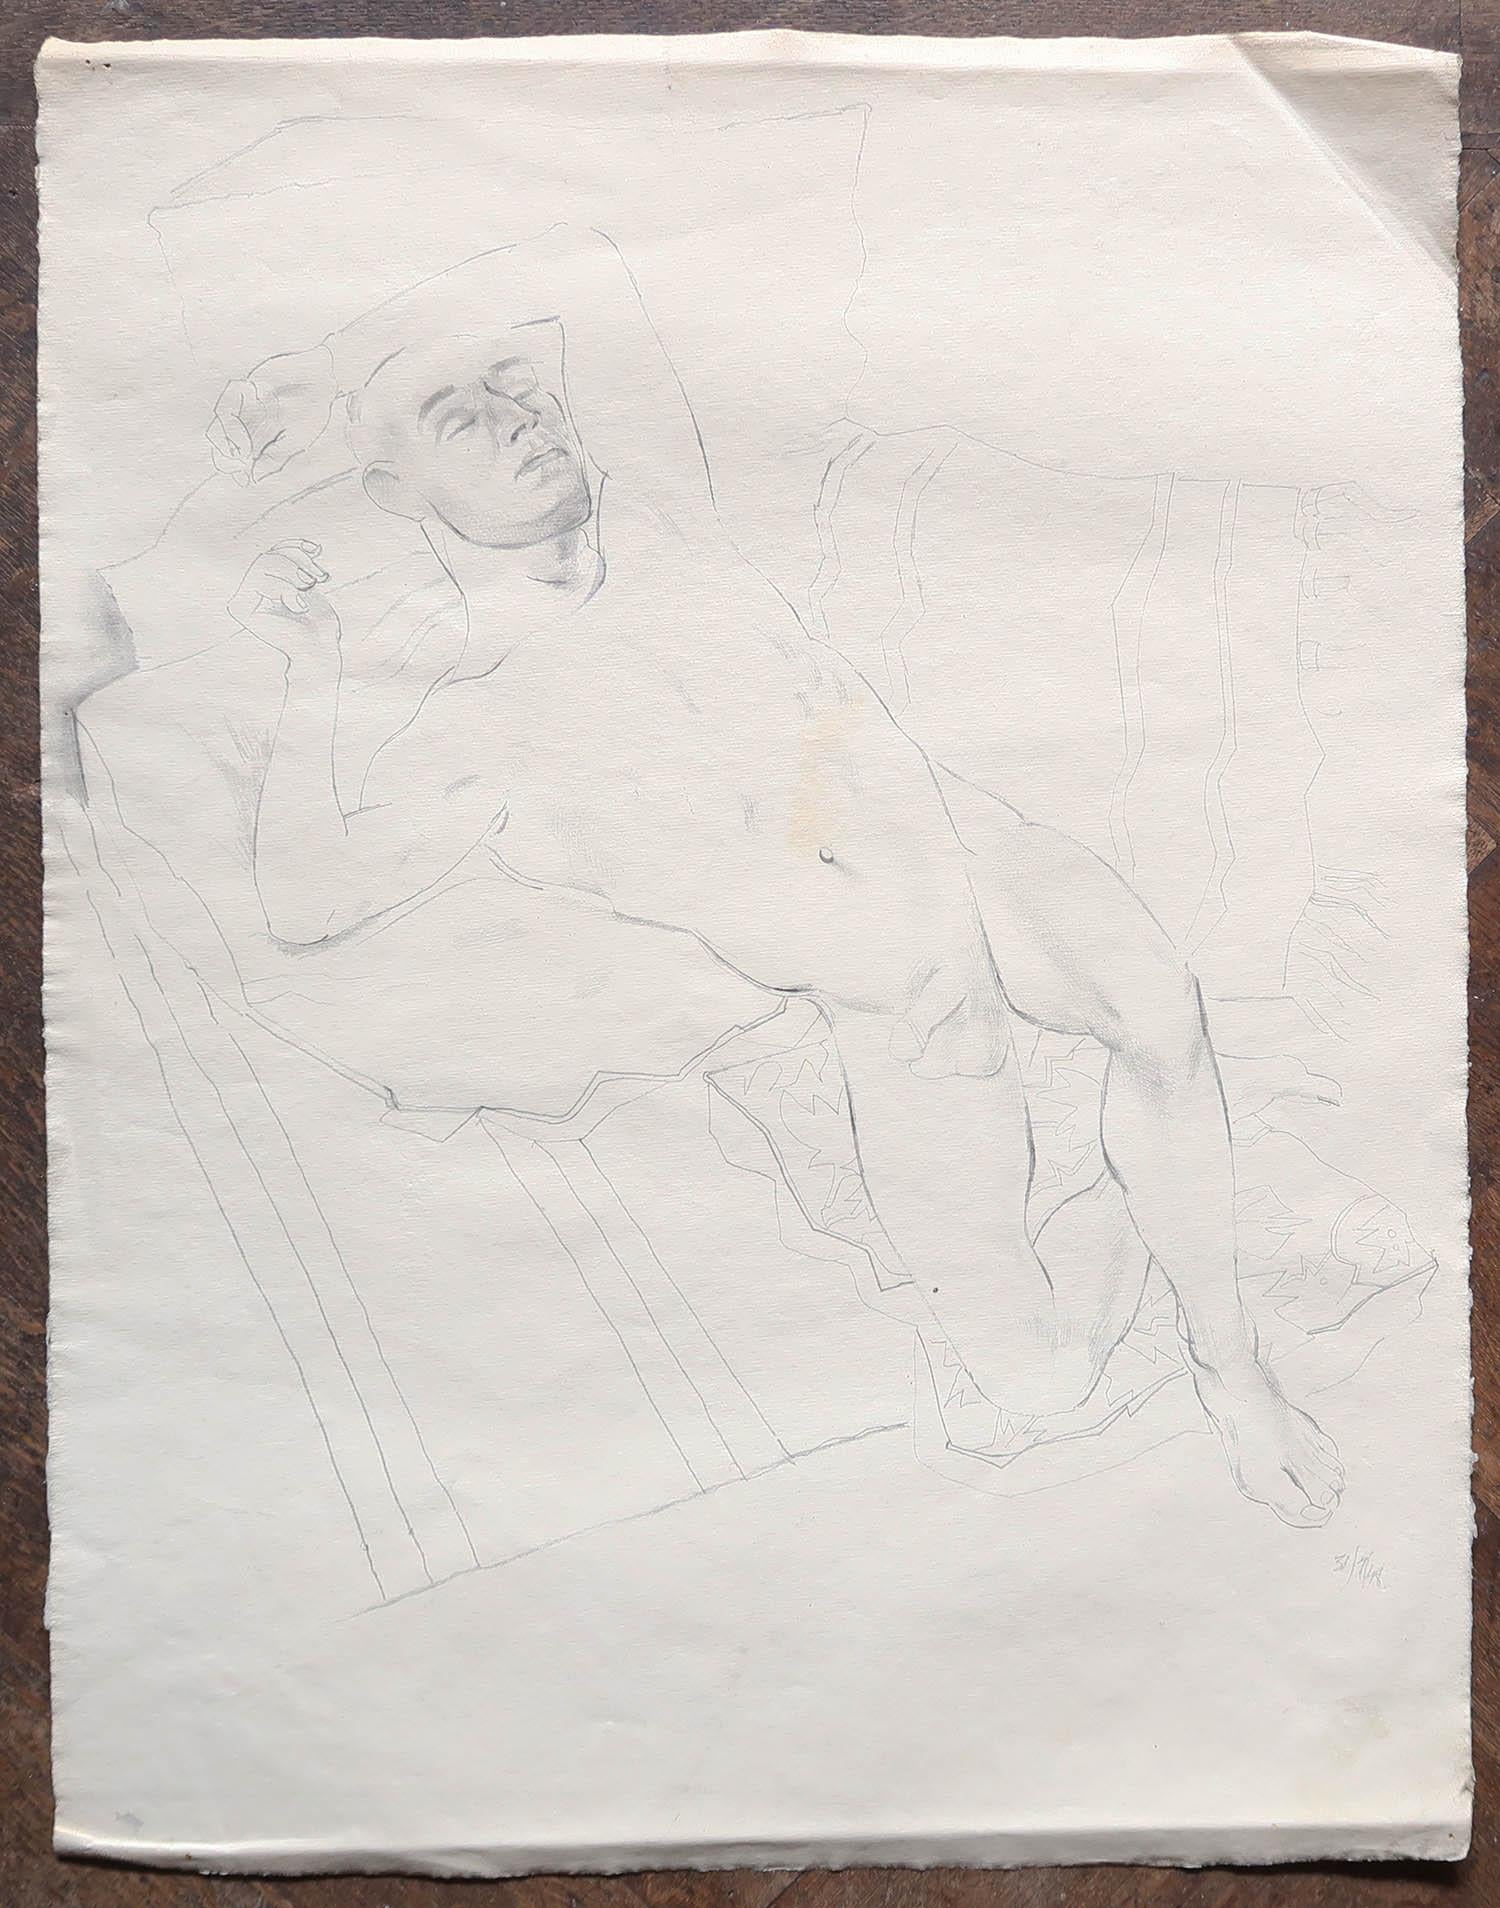 Mid-Century Modern Male Nude. Peter William Ibbetson. Graphite On Paper. Dated 1948